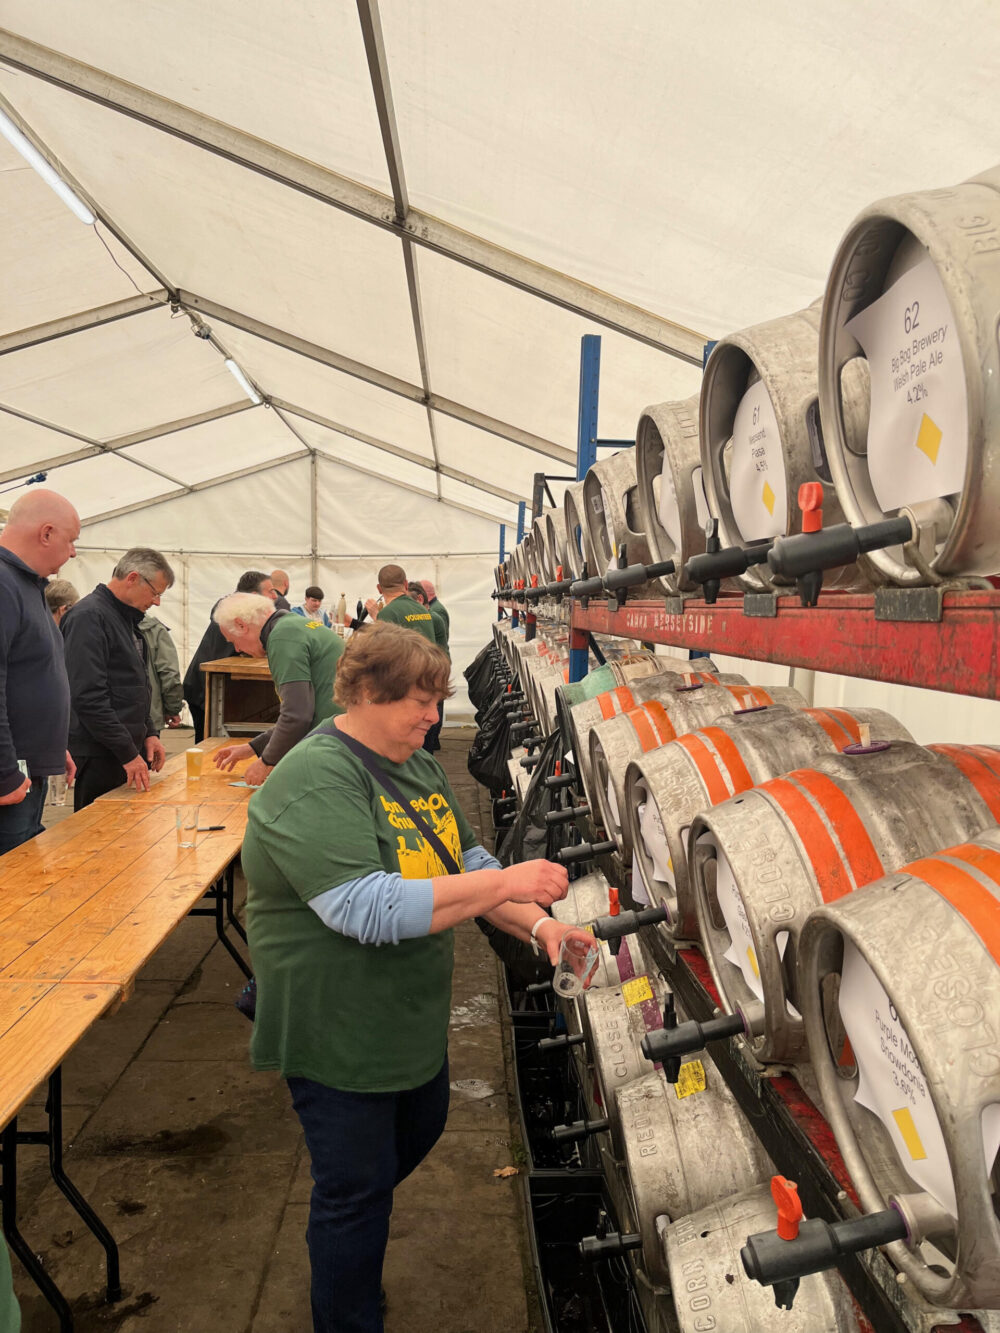 Bombed Out Church beer & cider festival